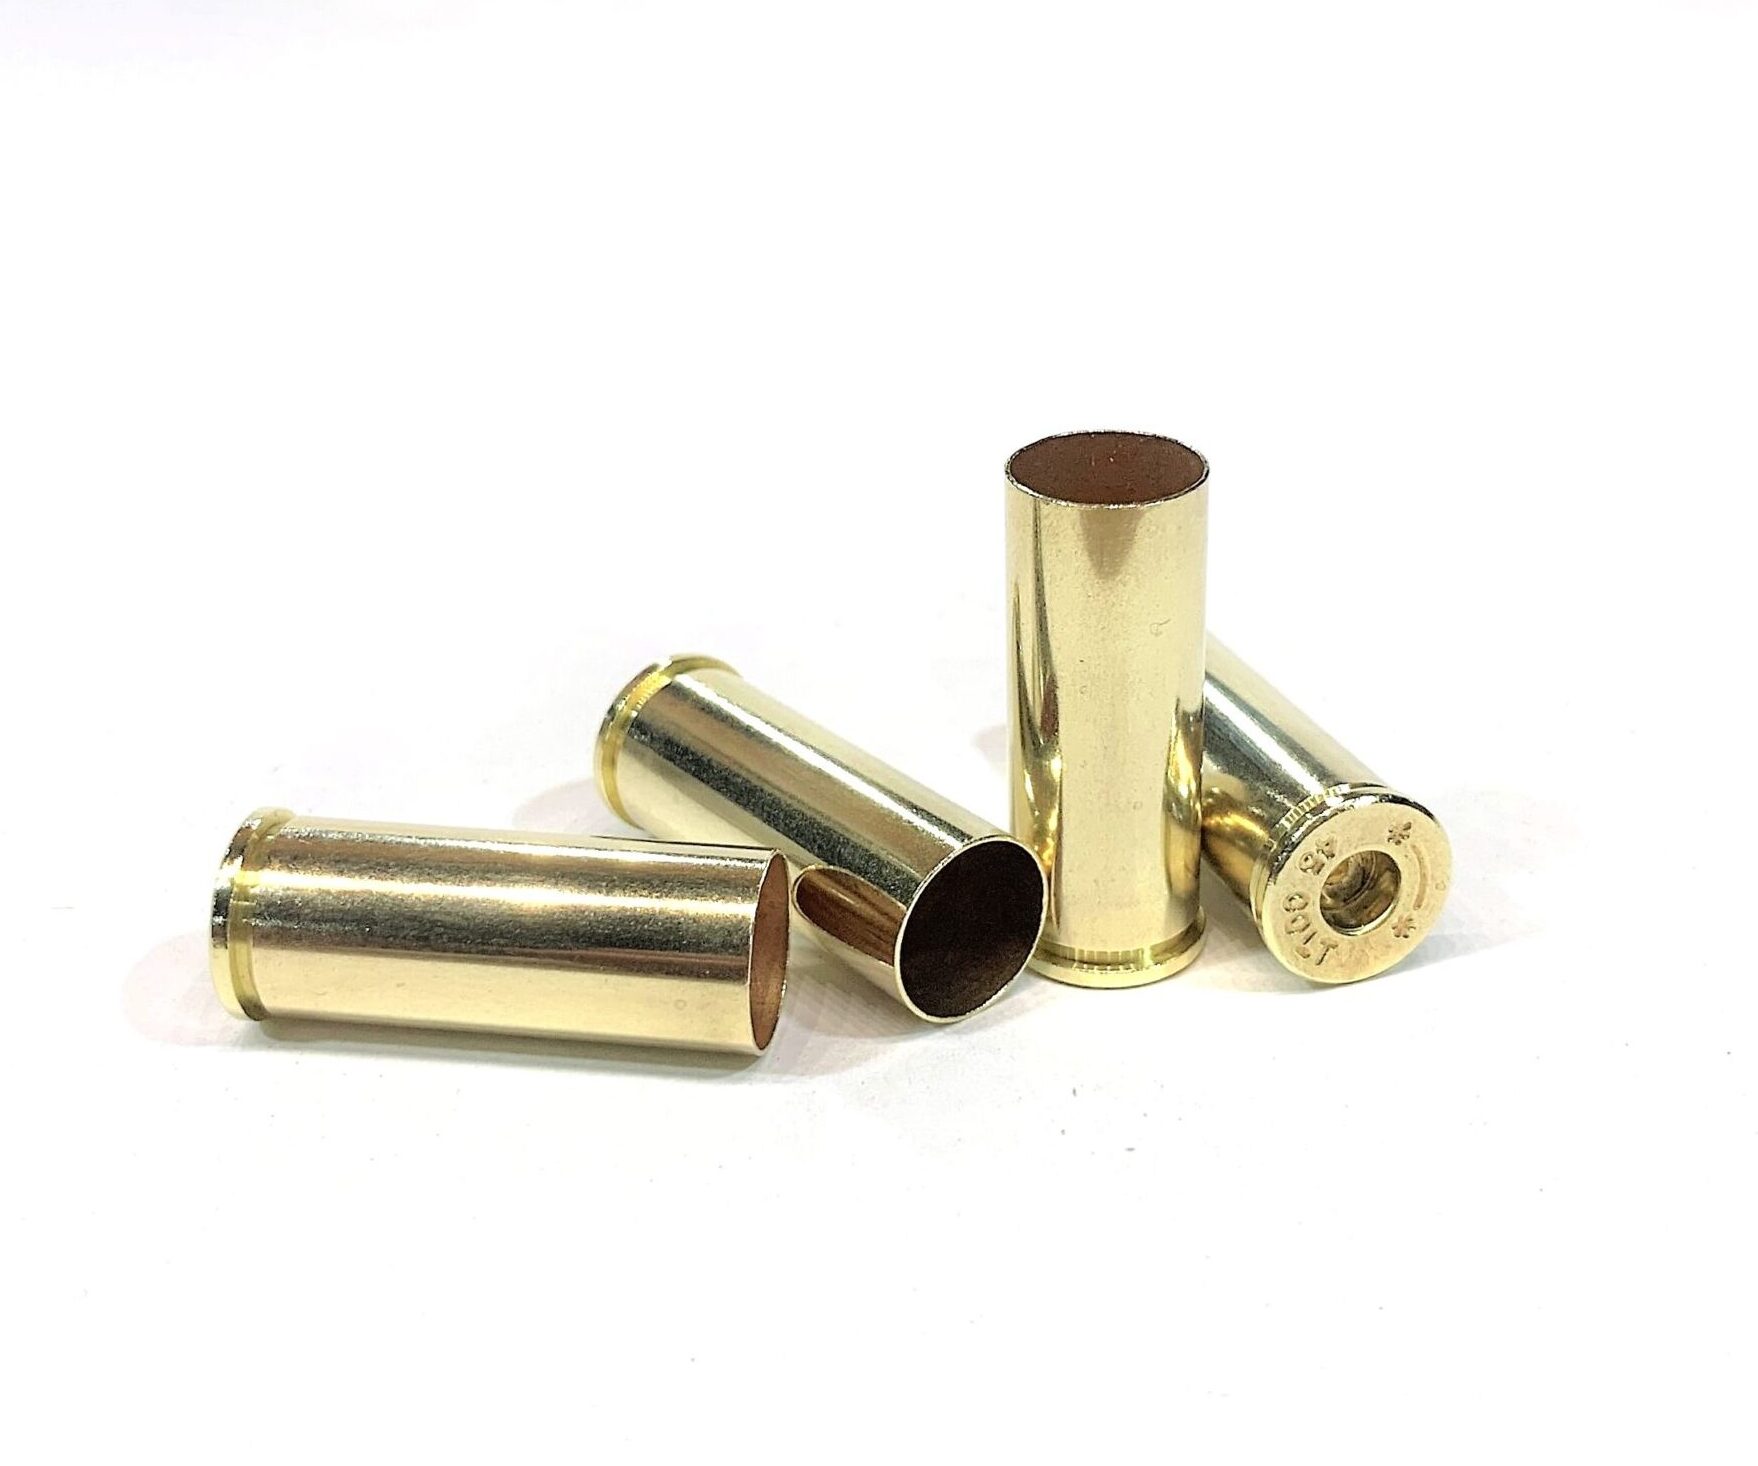 100 Pieces of NEW Starline .45 Long Colt NICKEL PLATED Brass Casings - –  Crate Holdings Ammo